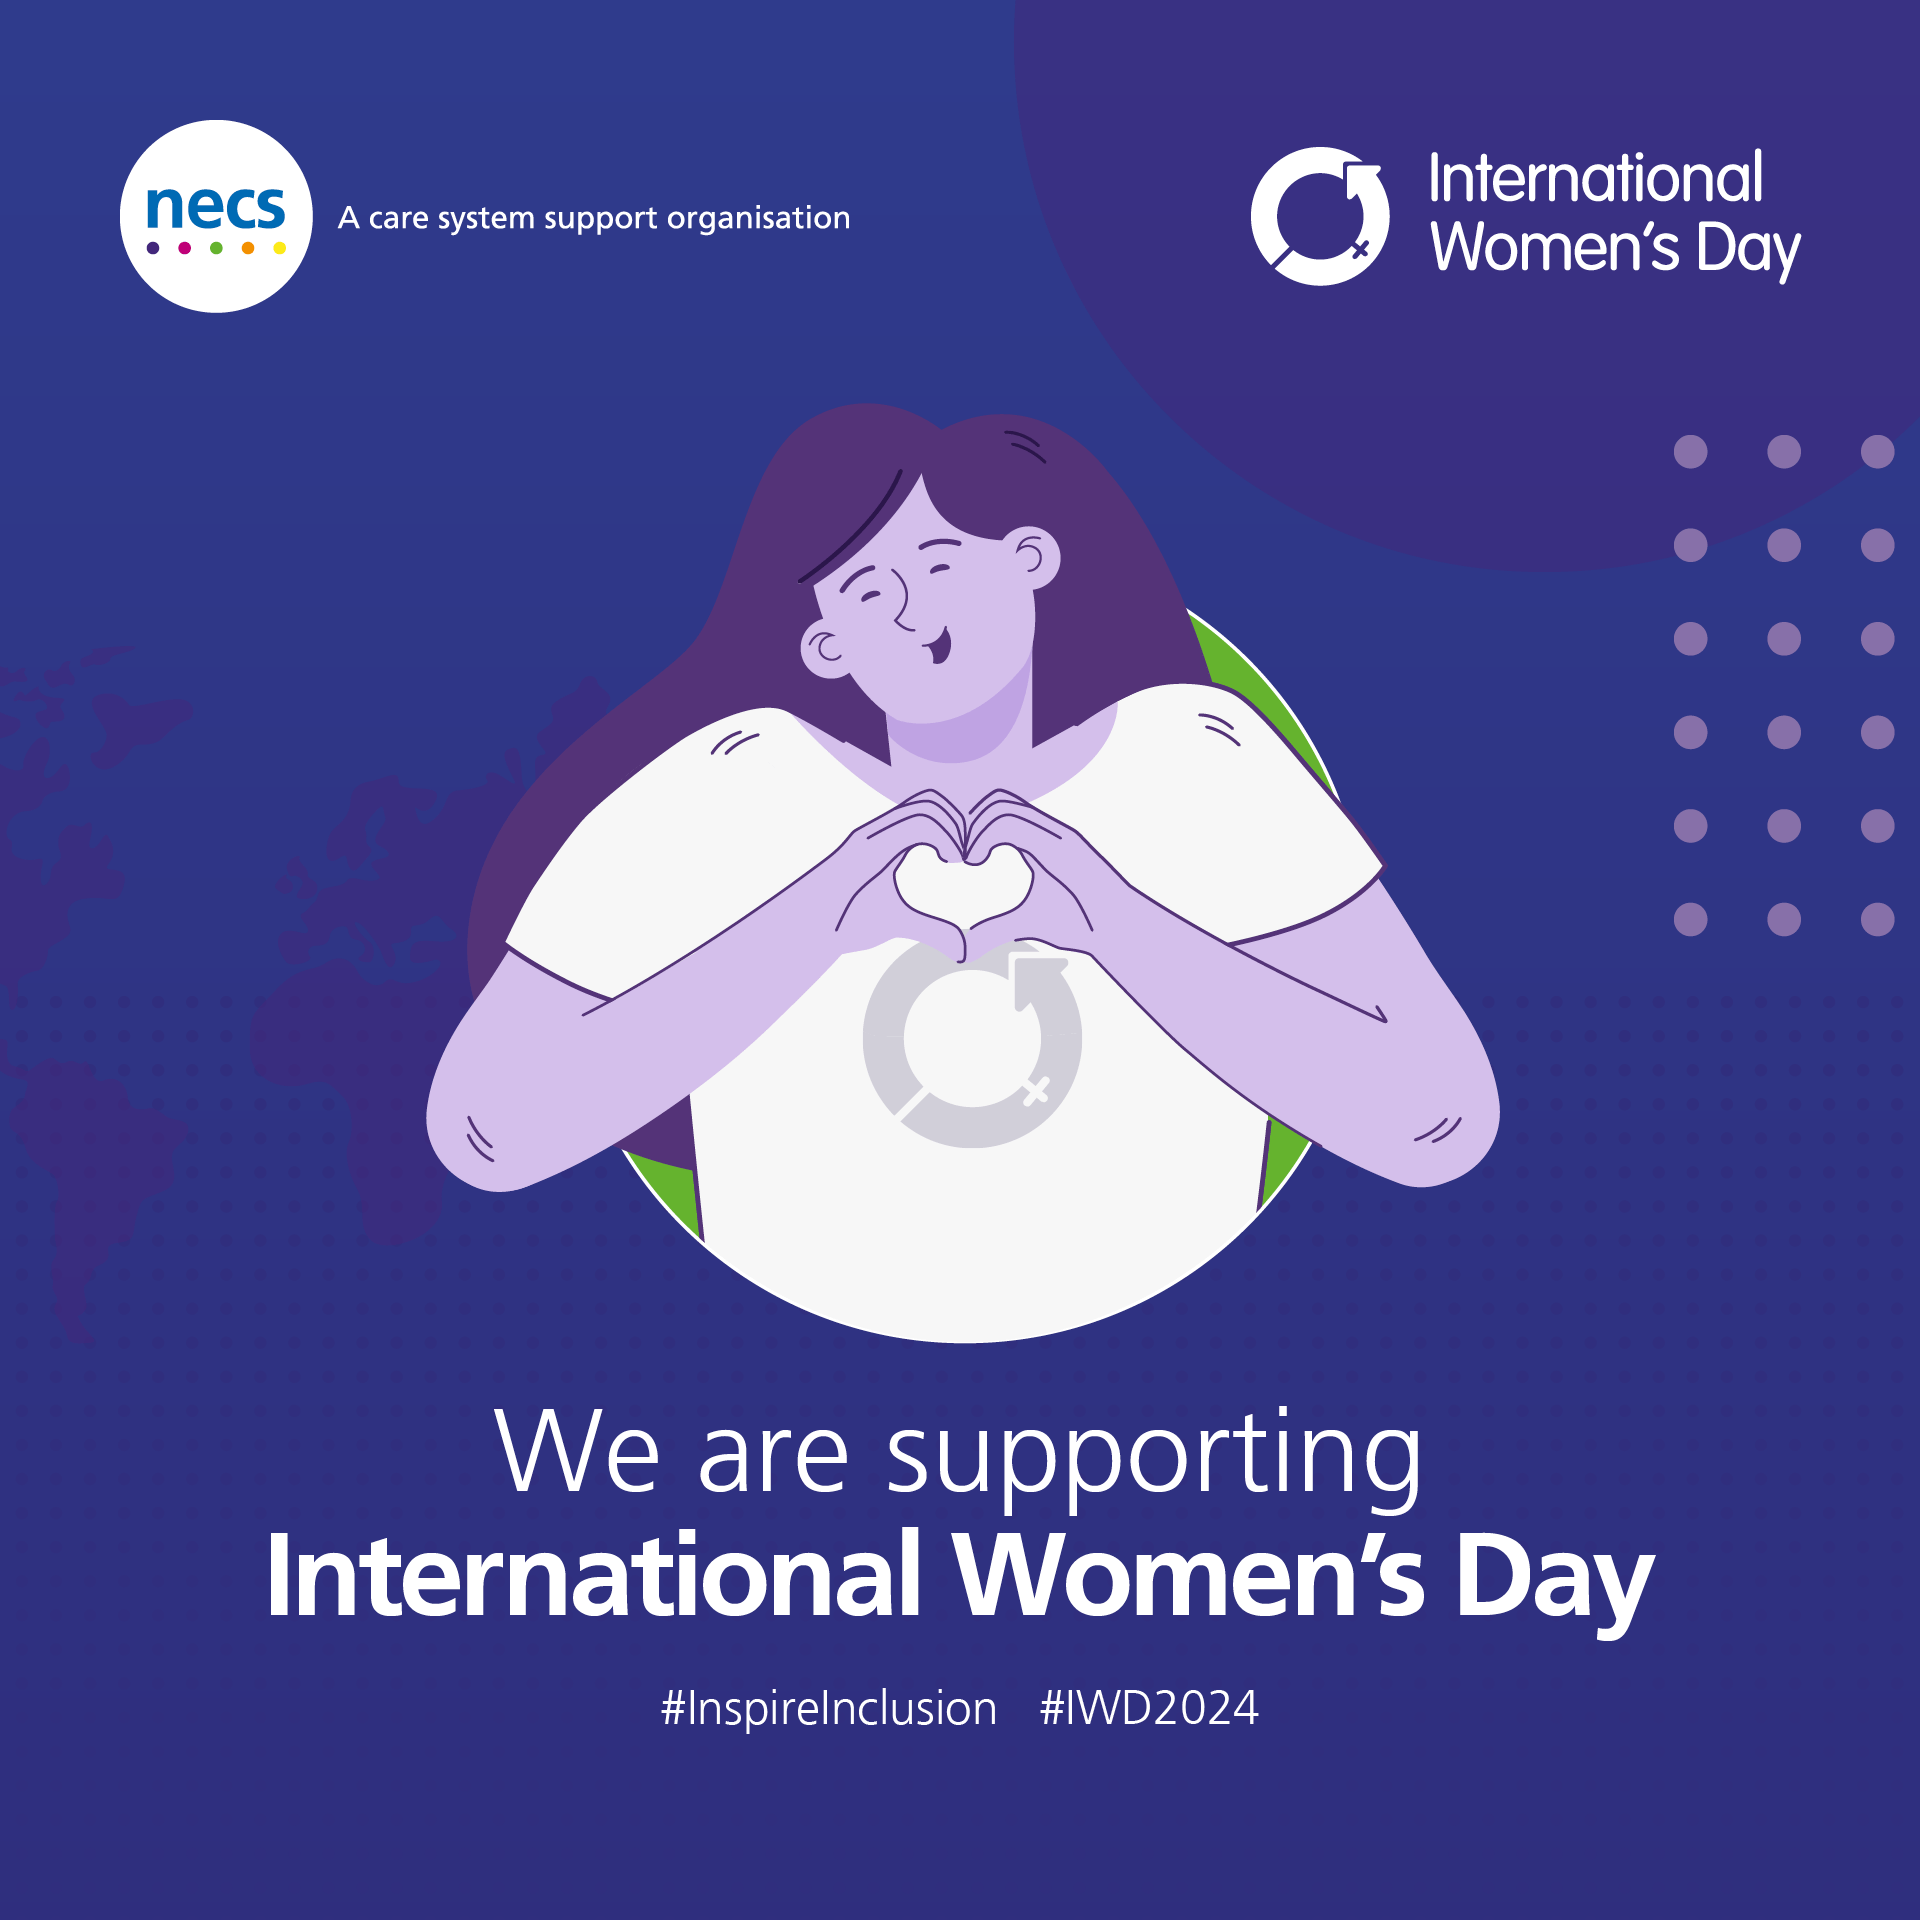 An illustration of a woman making a heart shape with her hands with the International Women's Day logo on her t-shirt